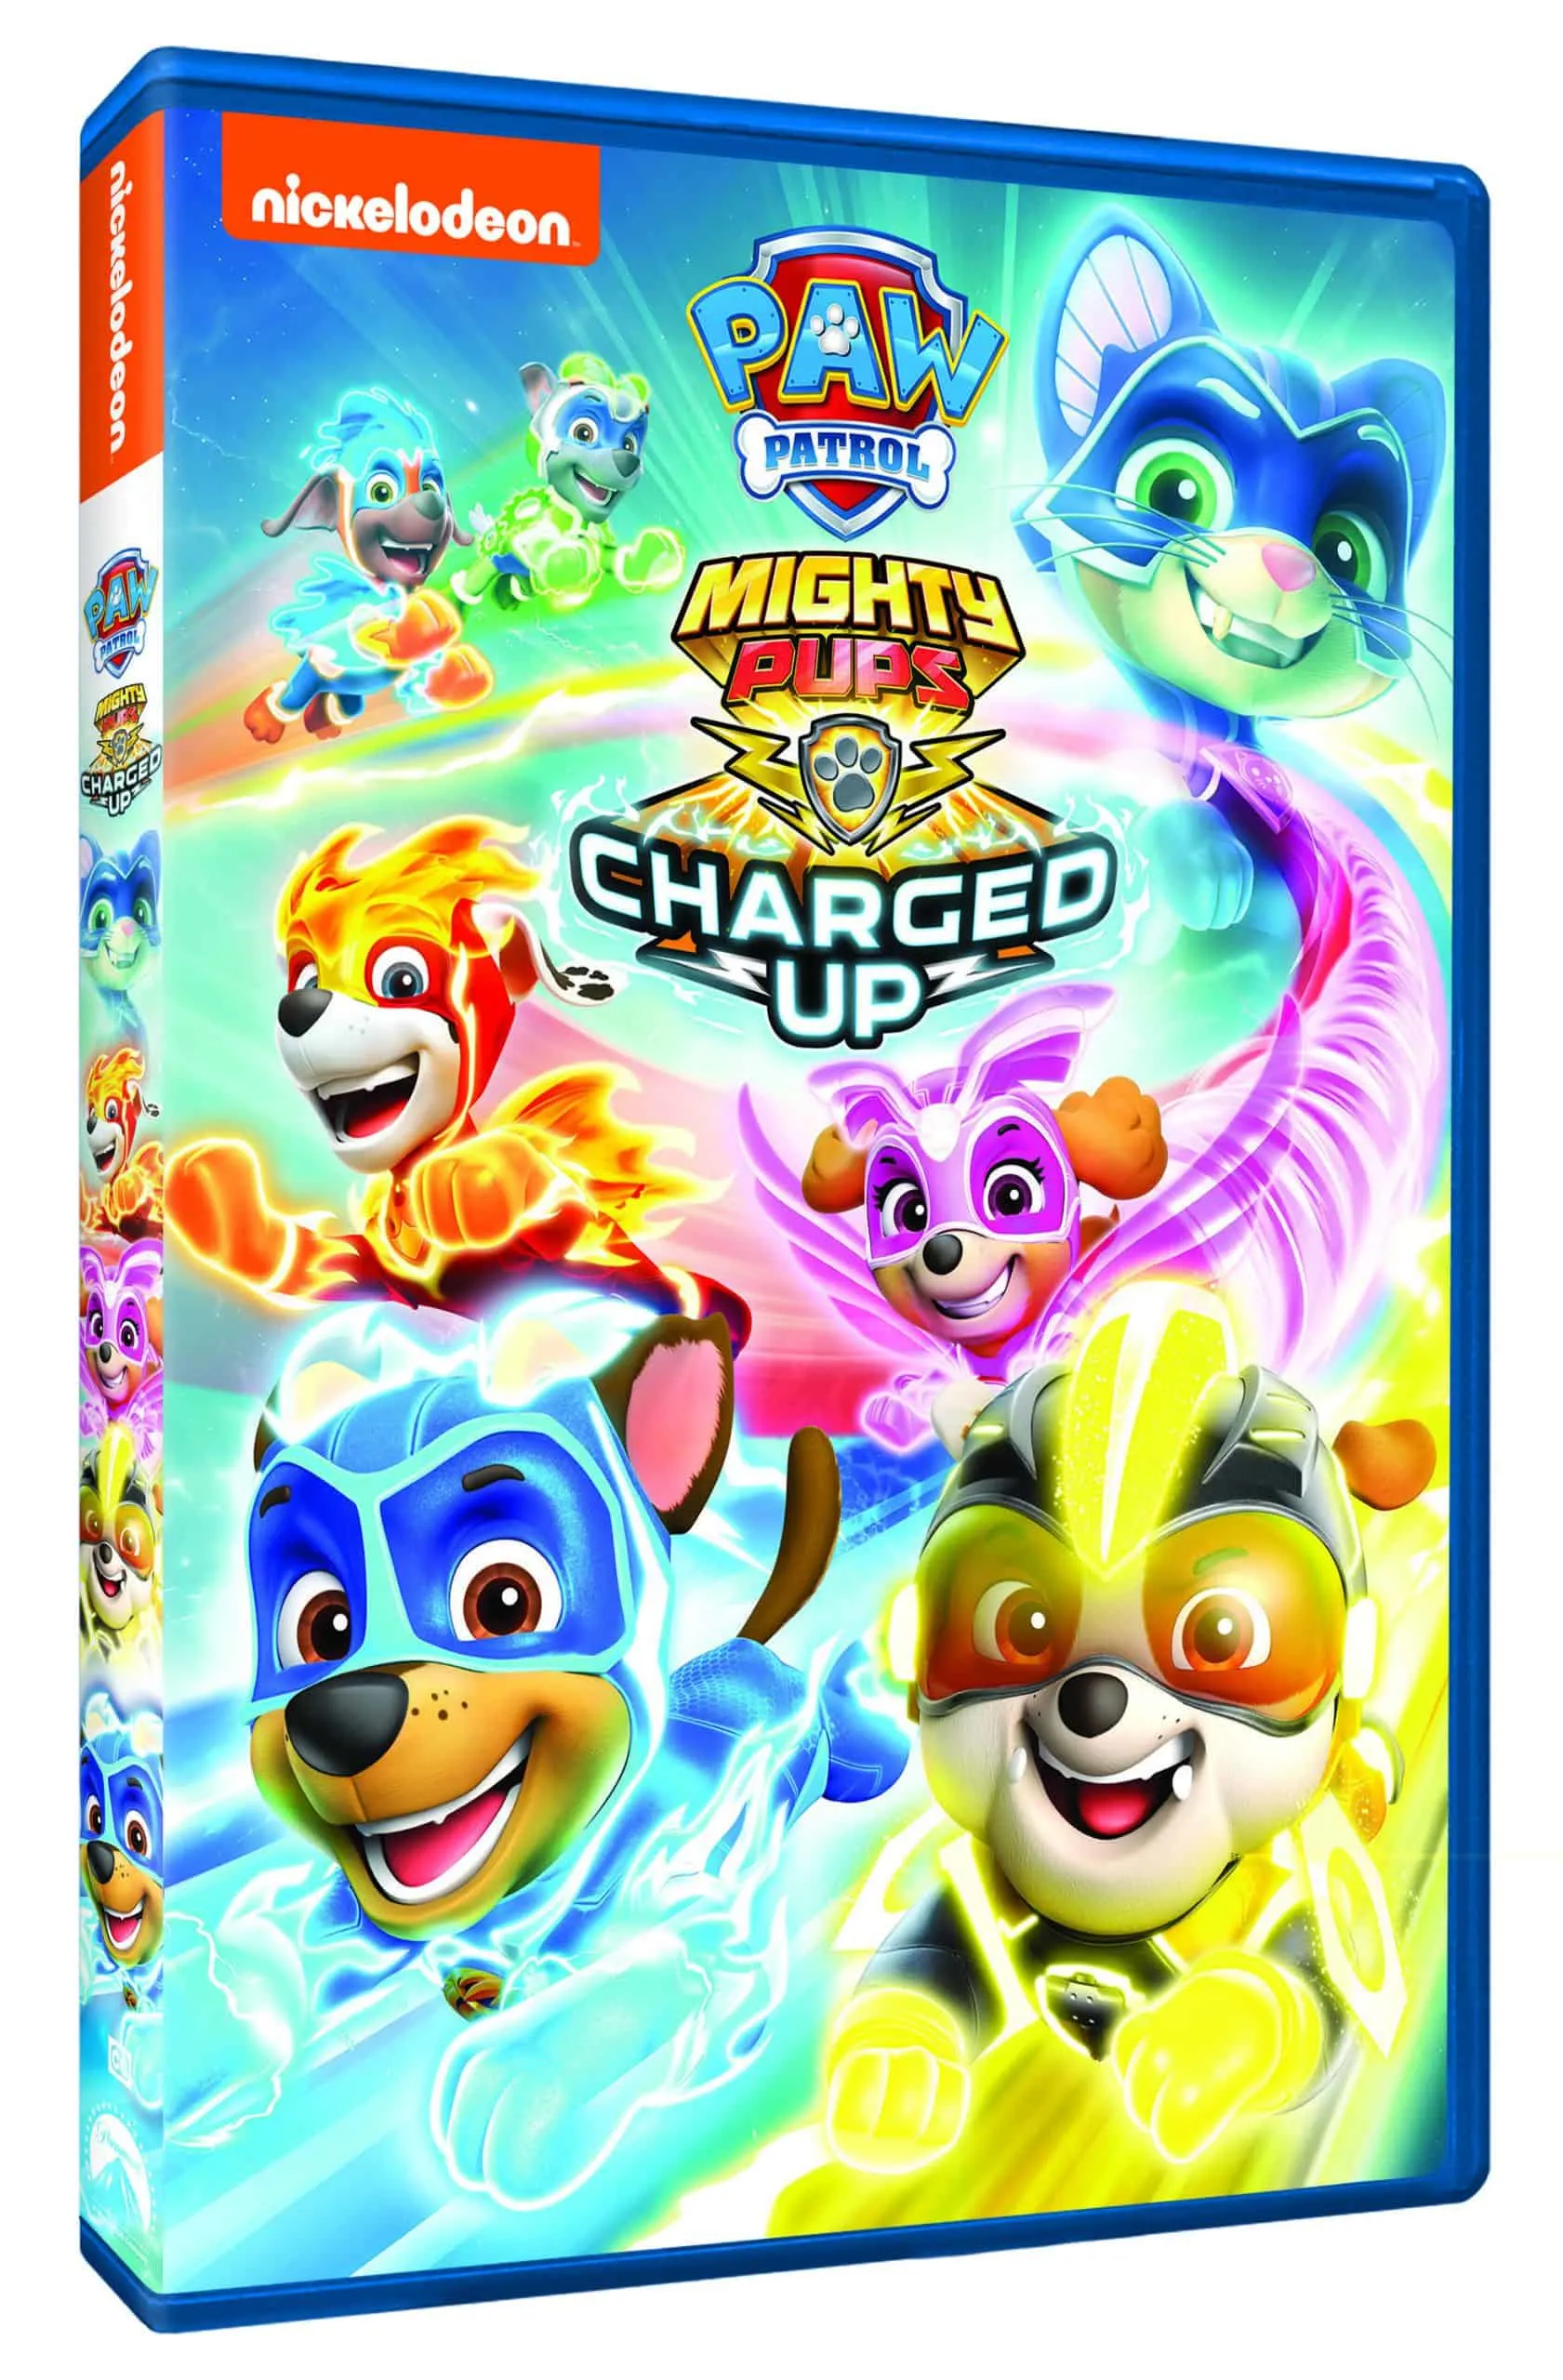 Mighty Pups Charged Up DVD giveaway